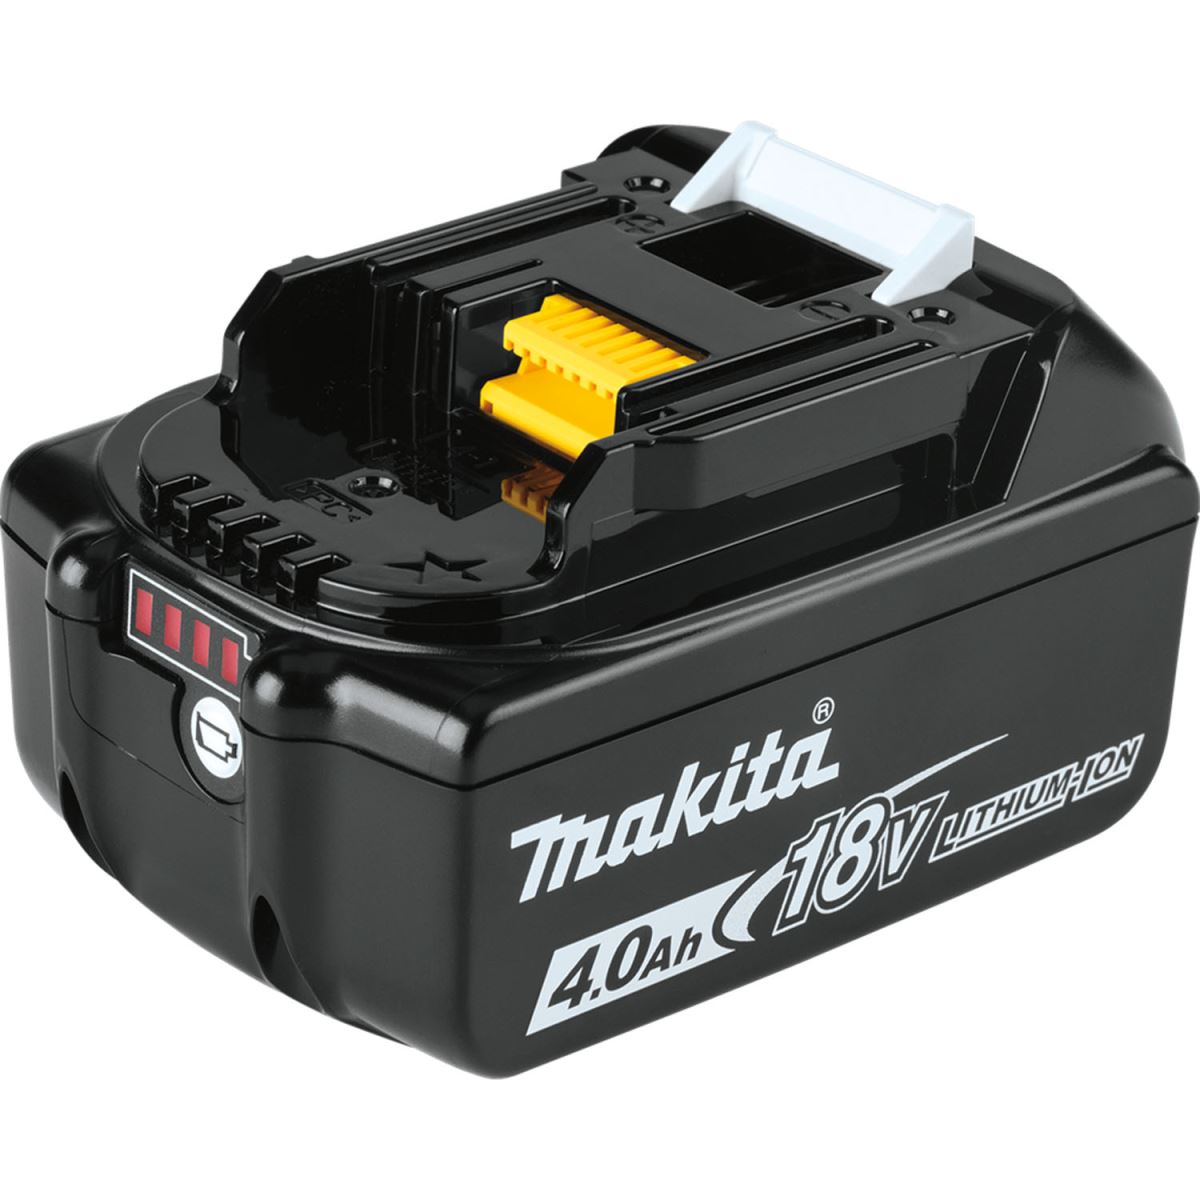 18V LXT LITHIUM-ION 4.0AH BATTERY